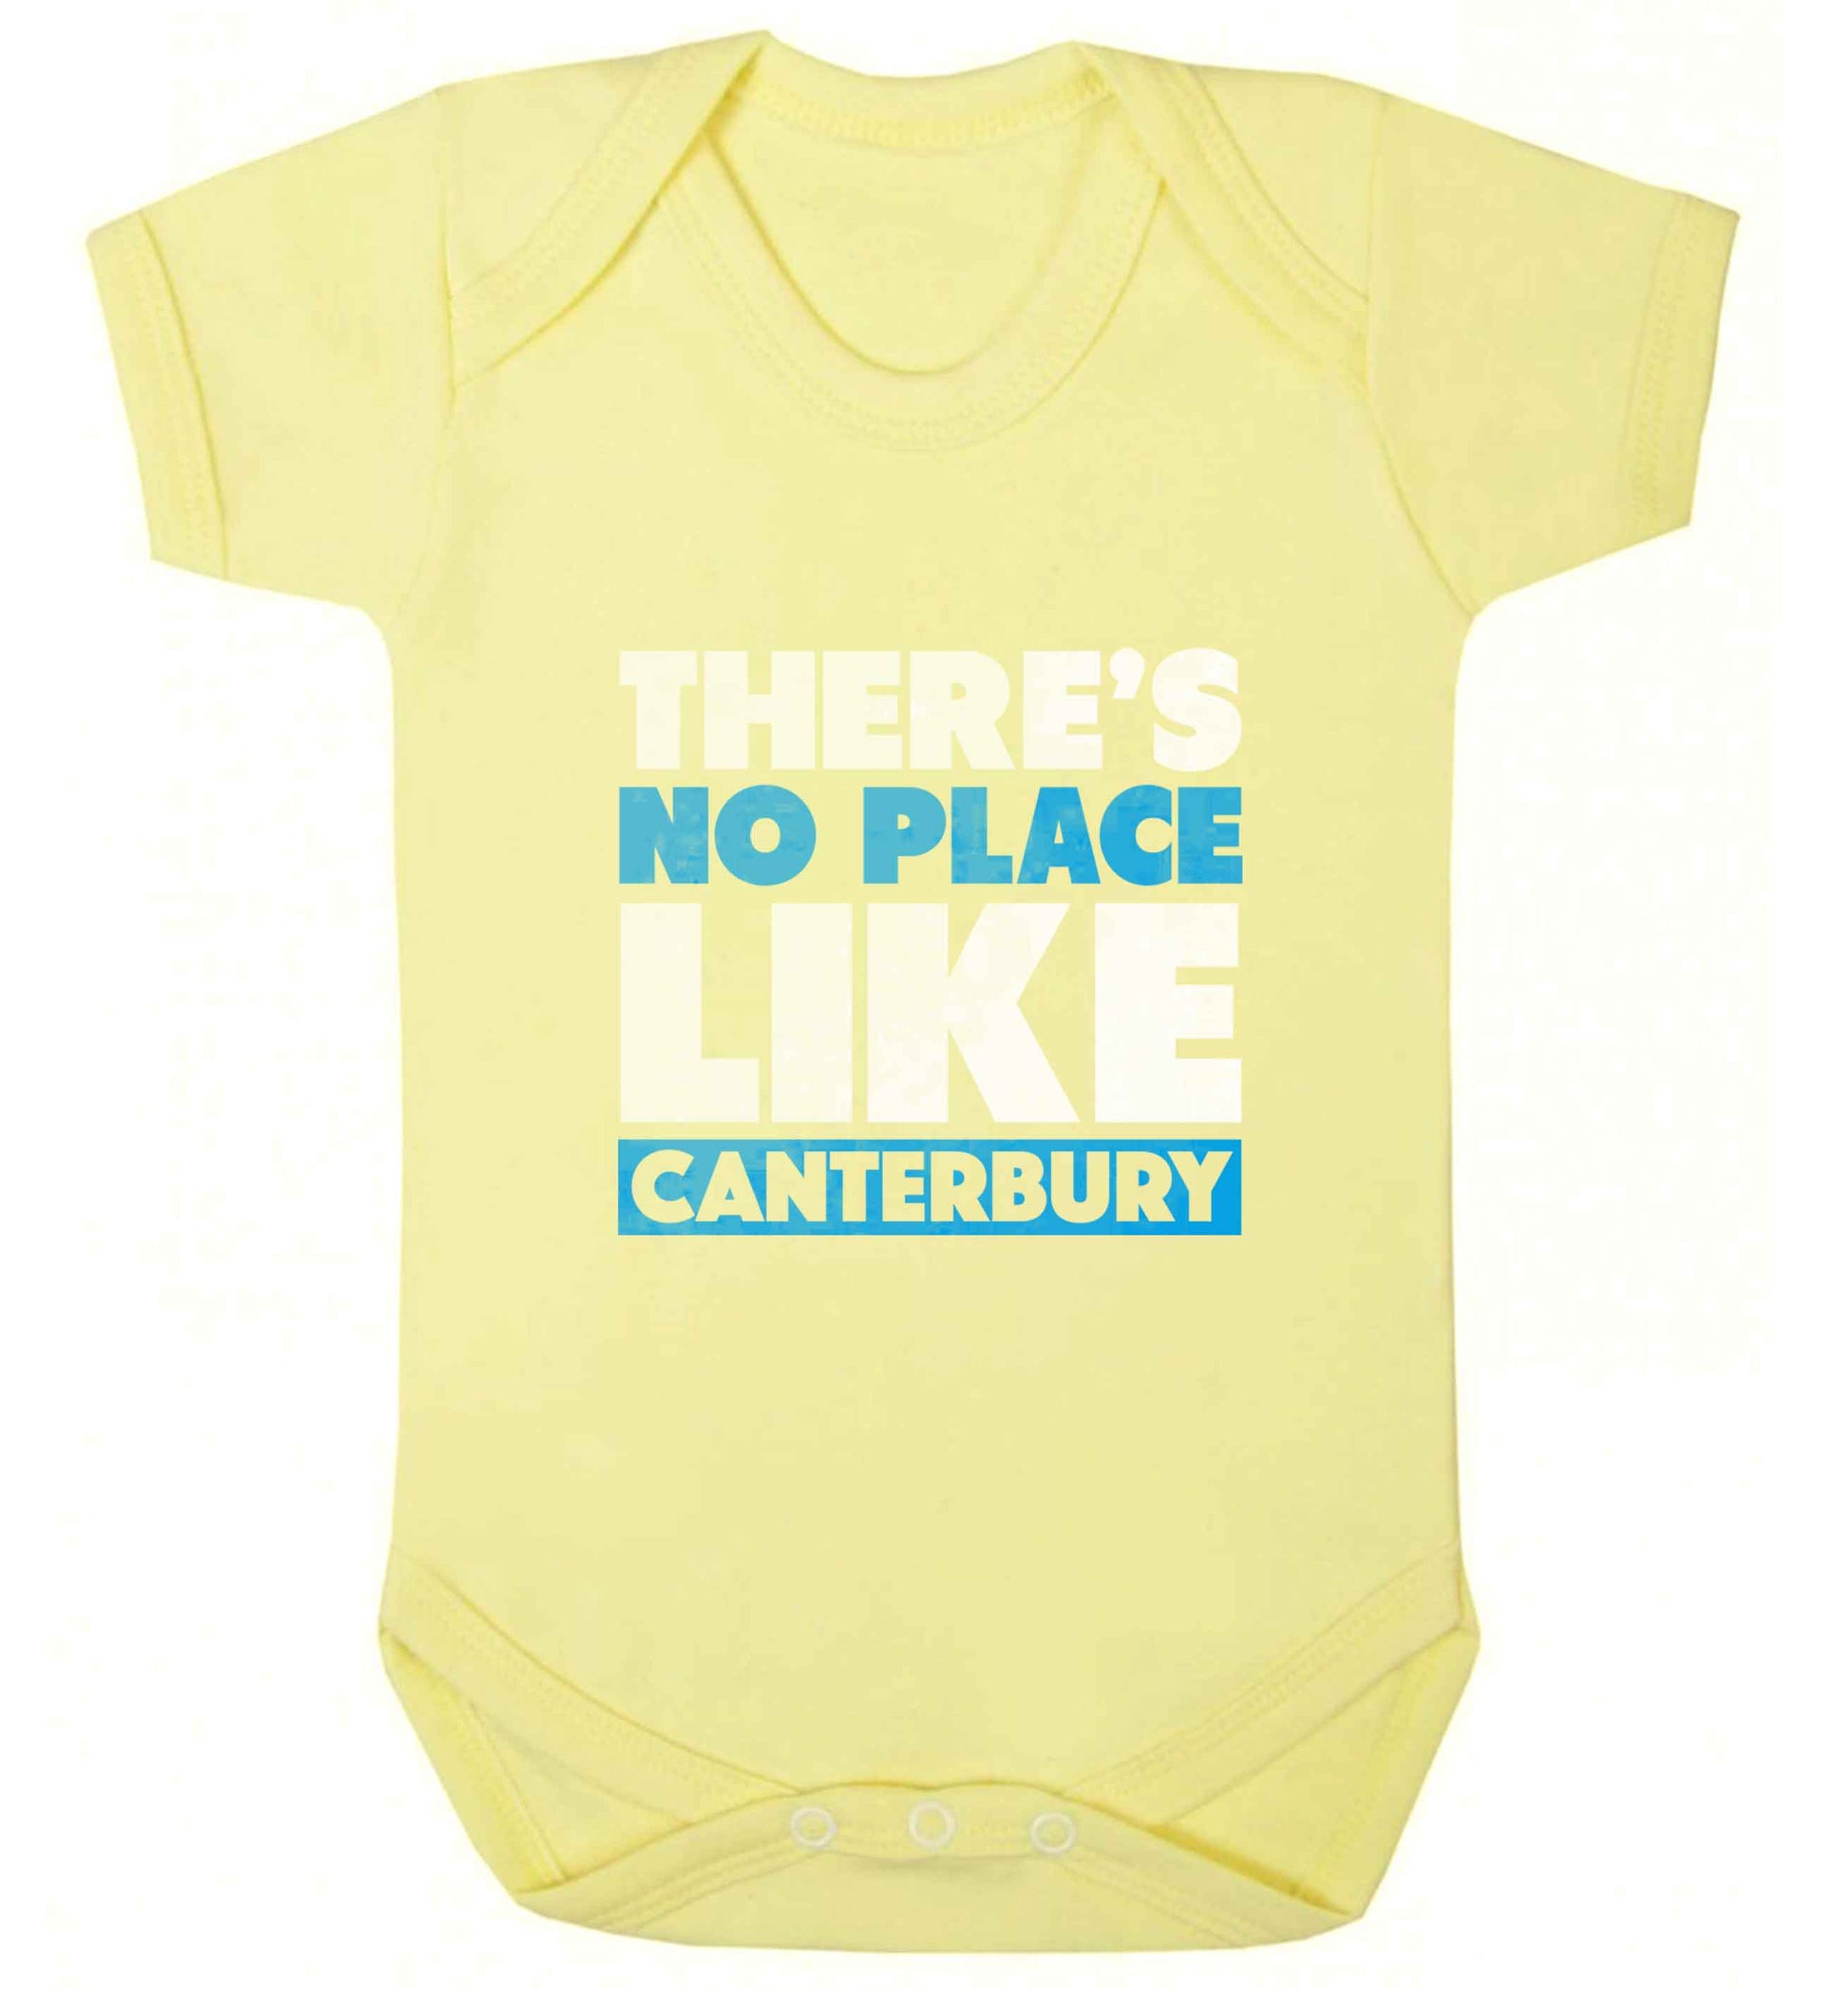 There's no place like Canterbury baby vest pale yellow 18-24 months